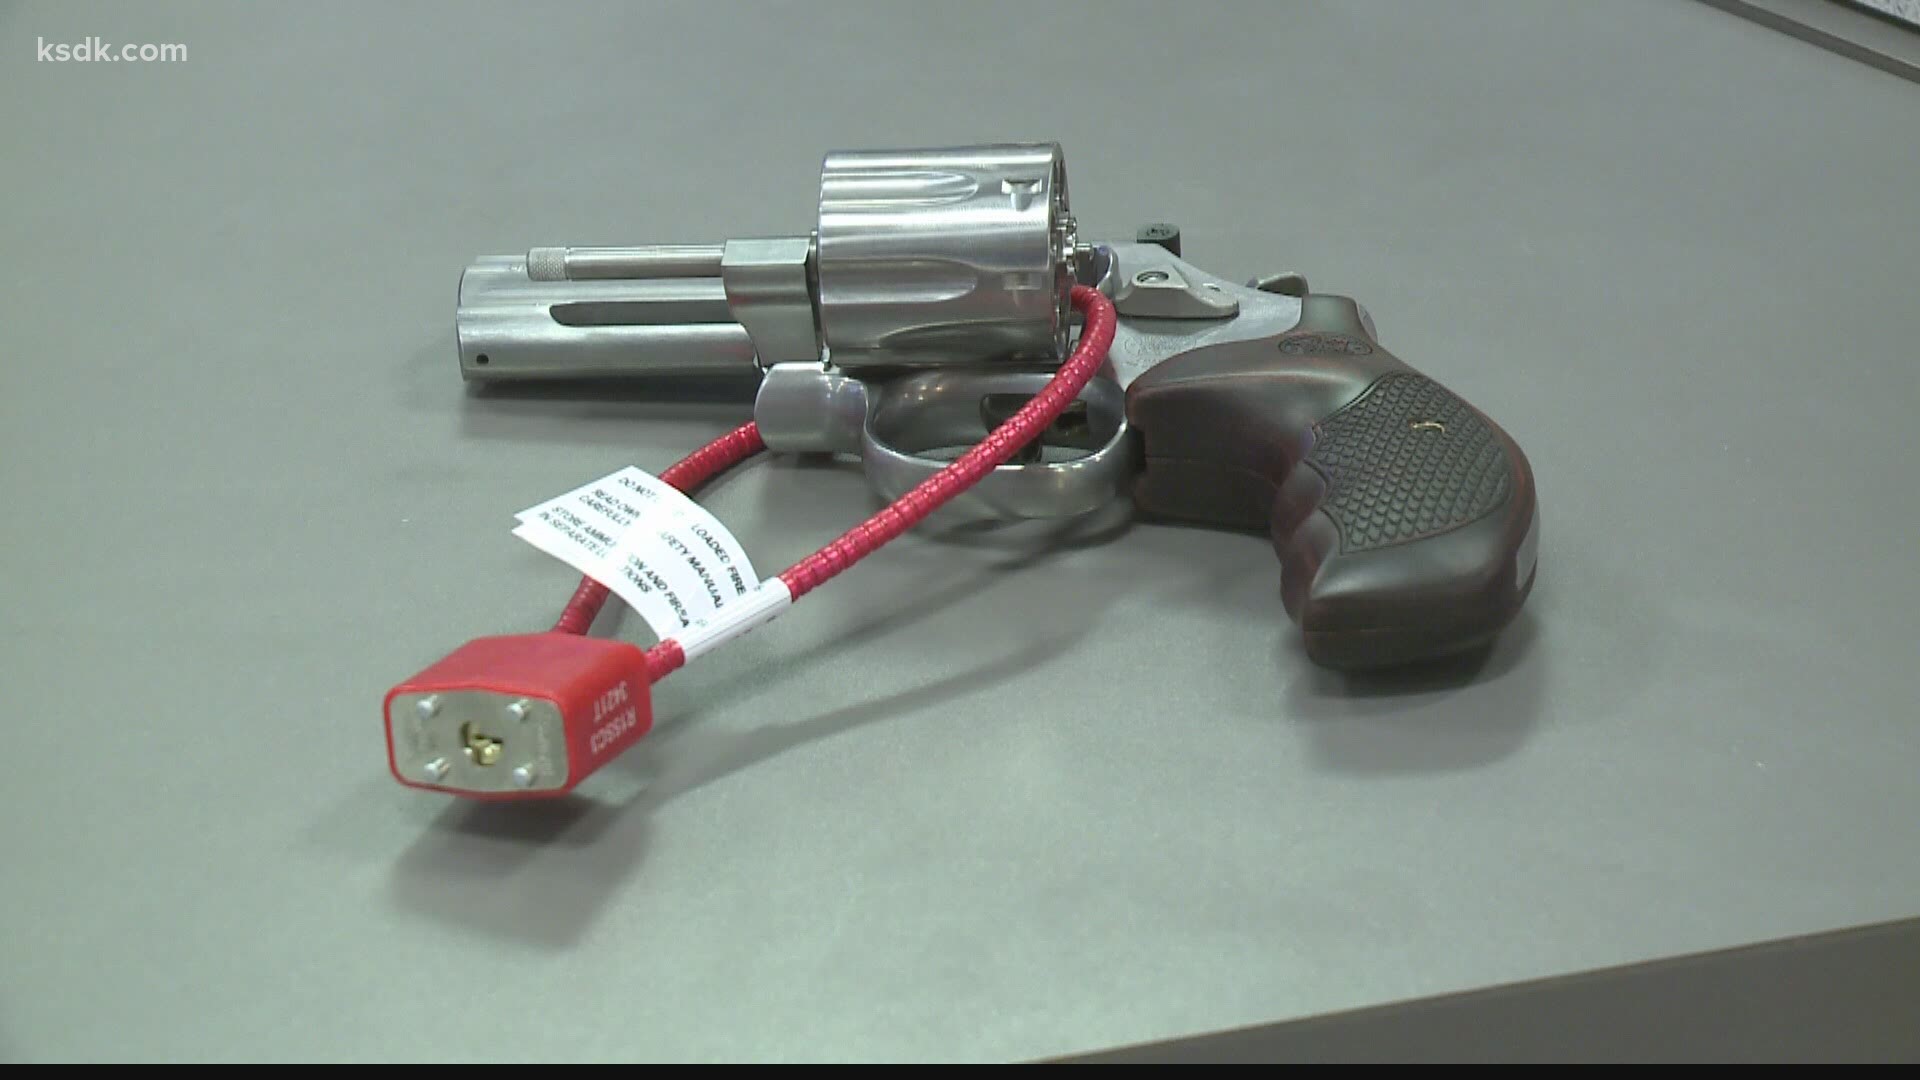 There’s a new partnership in St. Louis to keep children safe from firearms after a young girl was accidentally shot over the weekend.